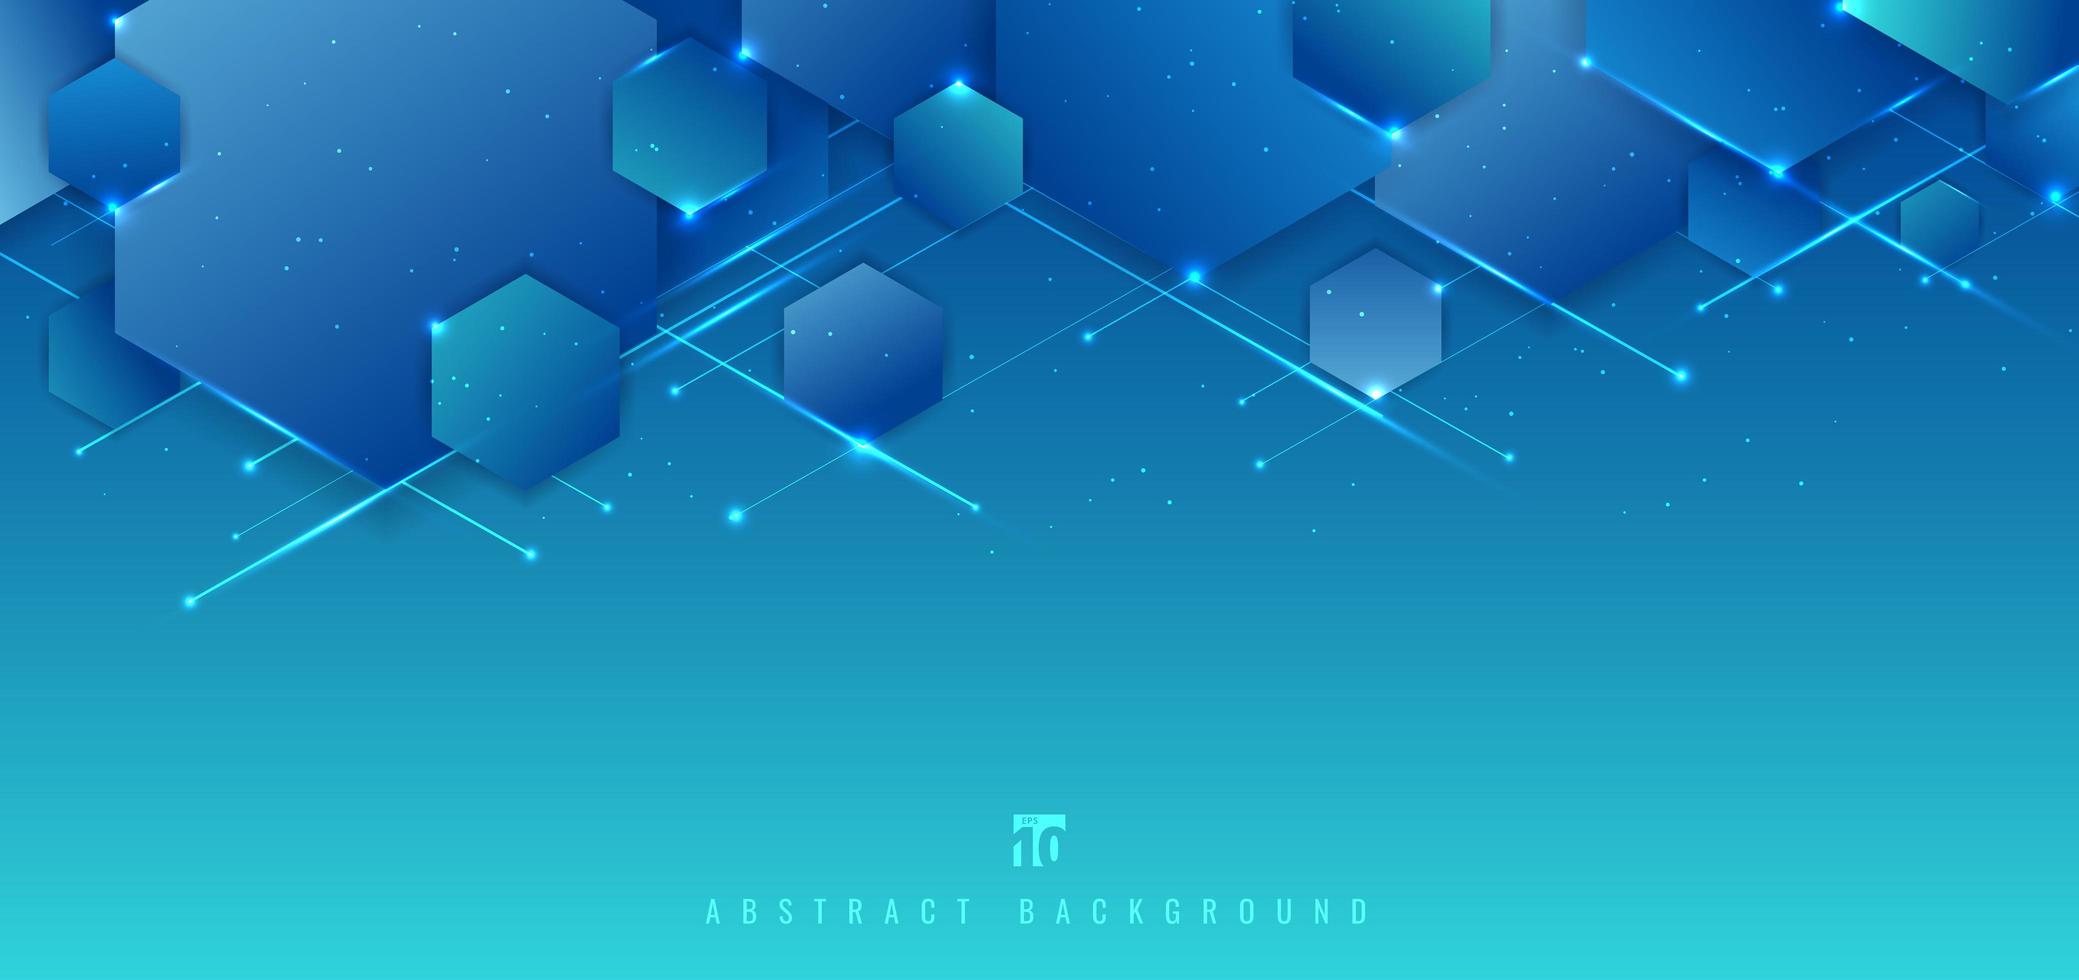 Abstract blue background geometric hexagons overlapping with lines and lighting technology futuristic digital concept. vector